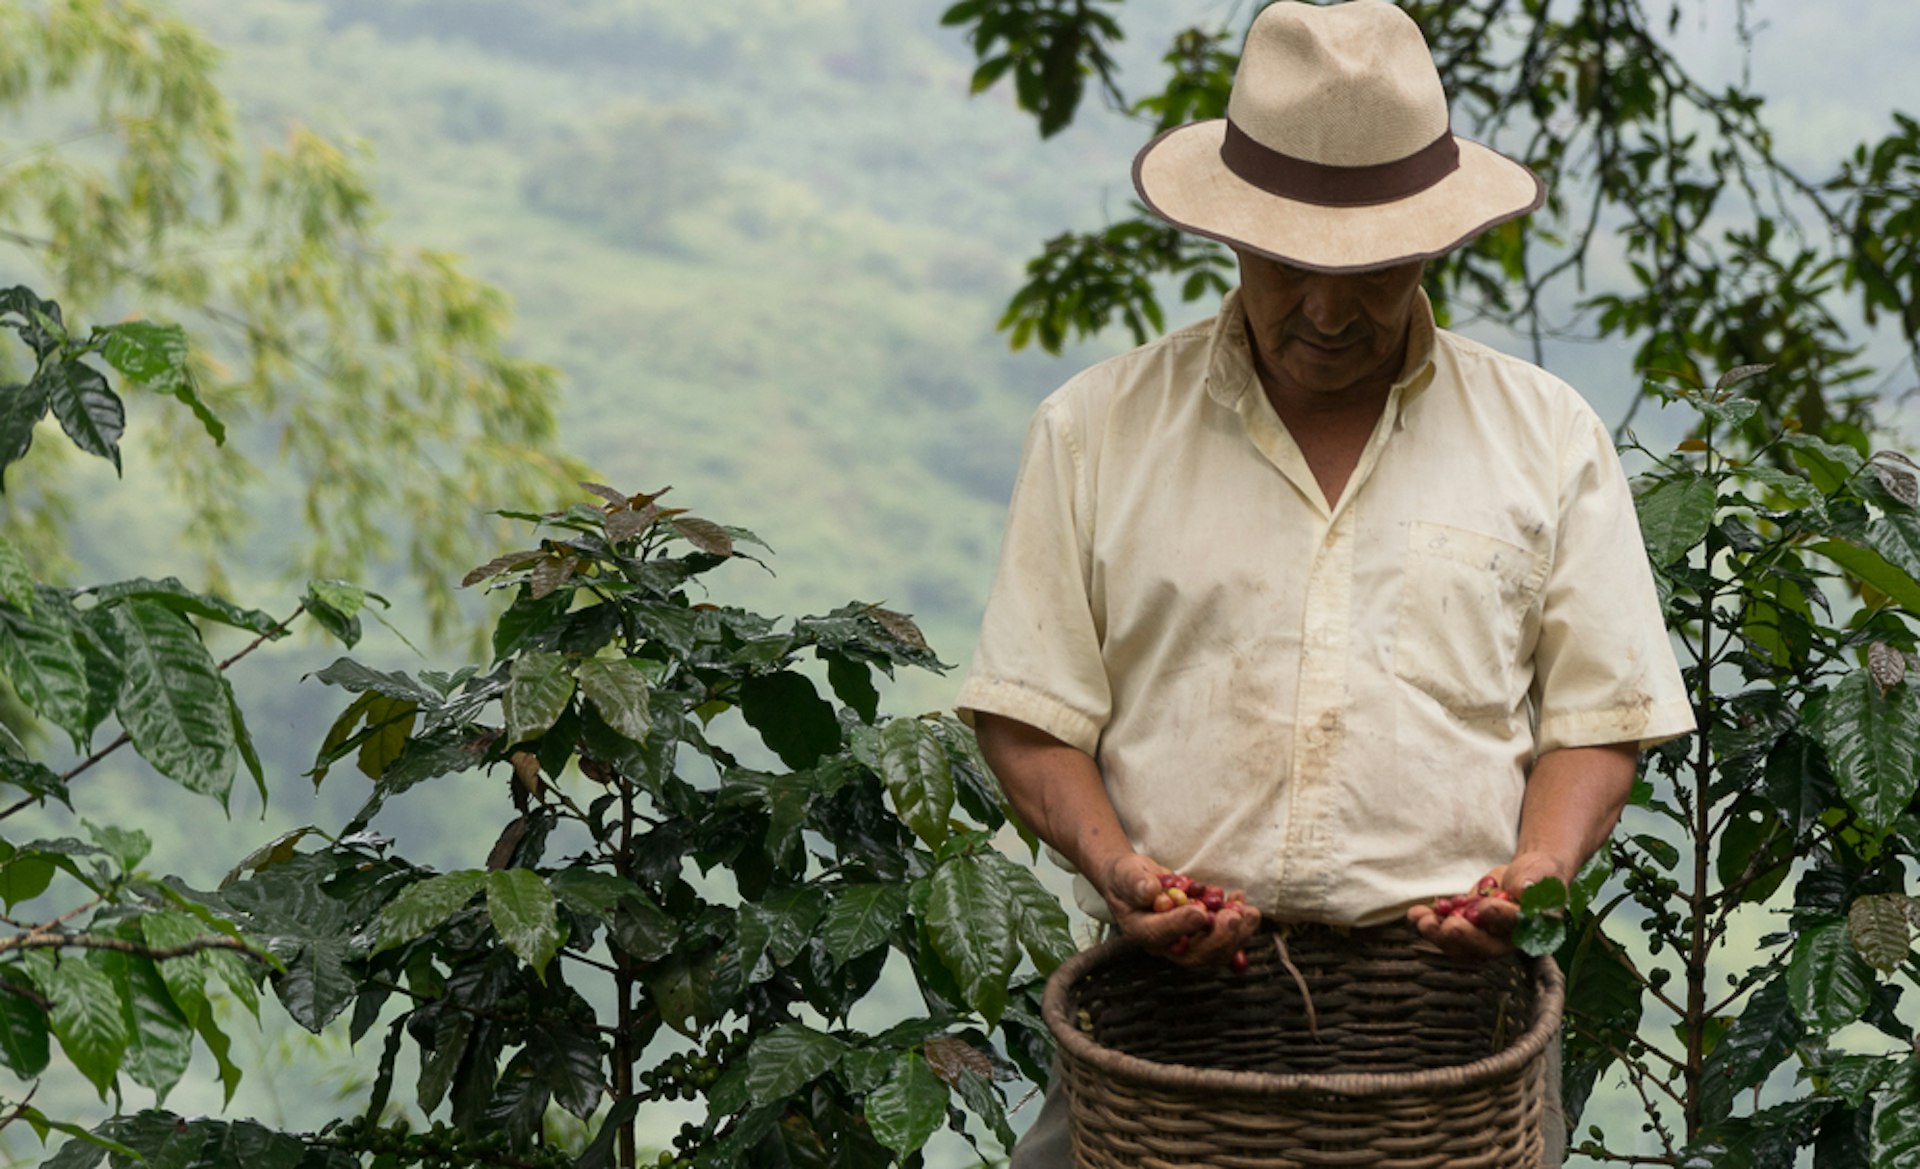 Peace is offering Colombia's coffee trade a chance to grow